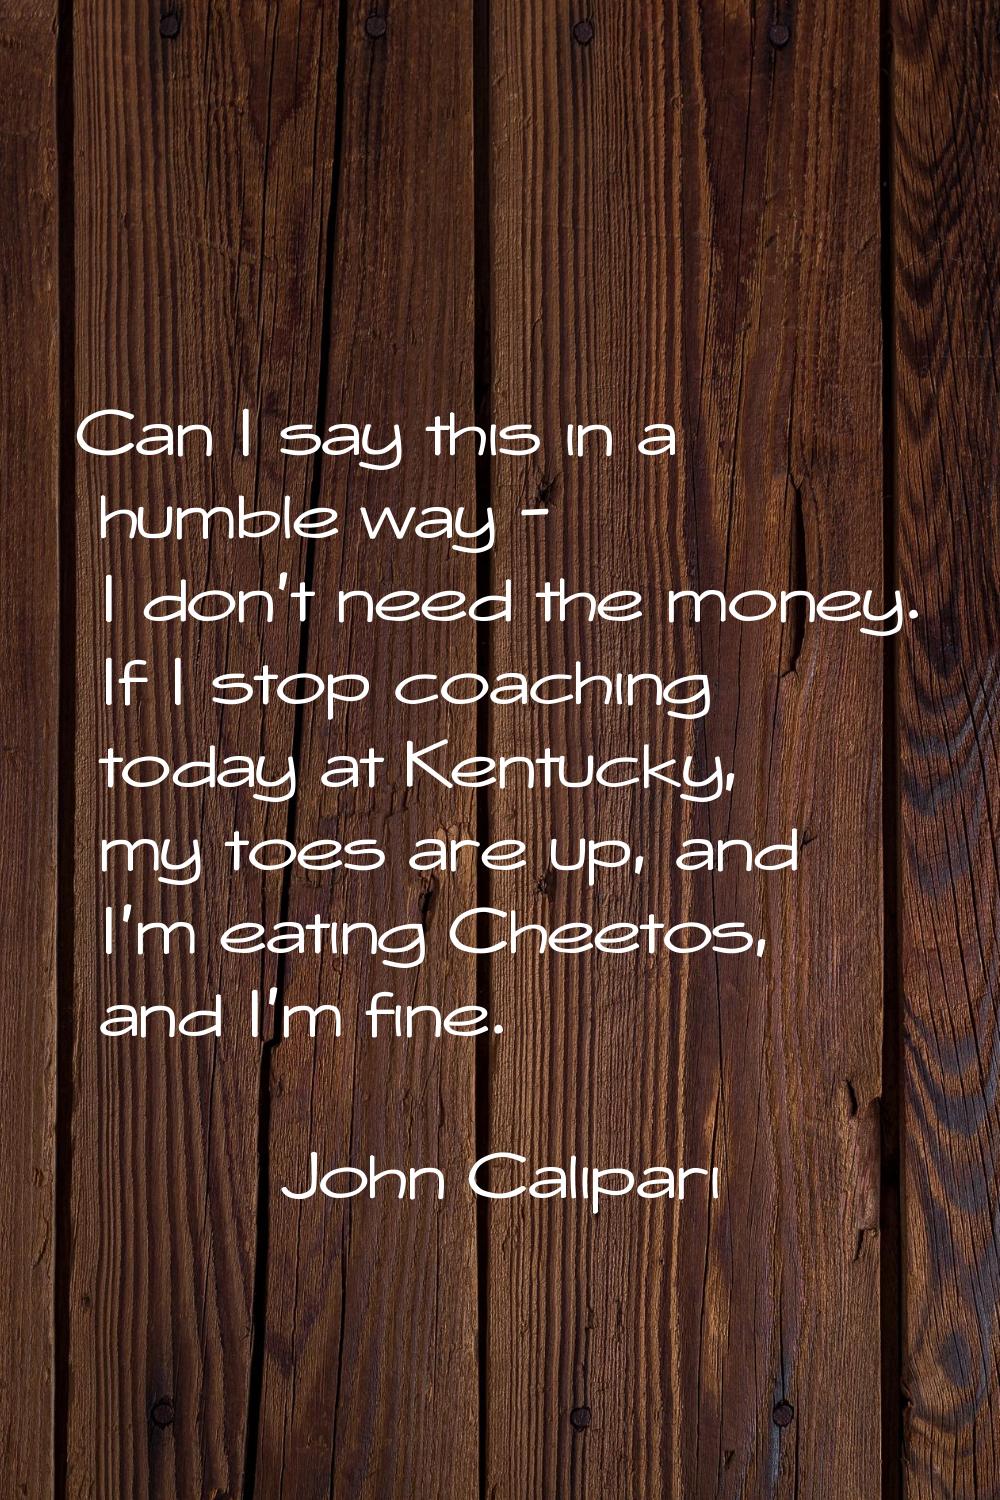 Can I say this in a humble way - I don't need the money. If I stop coaching today at Kentucky, my t